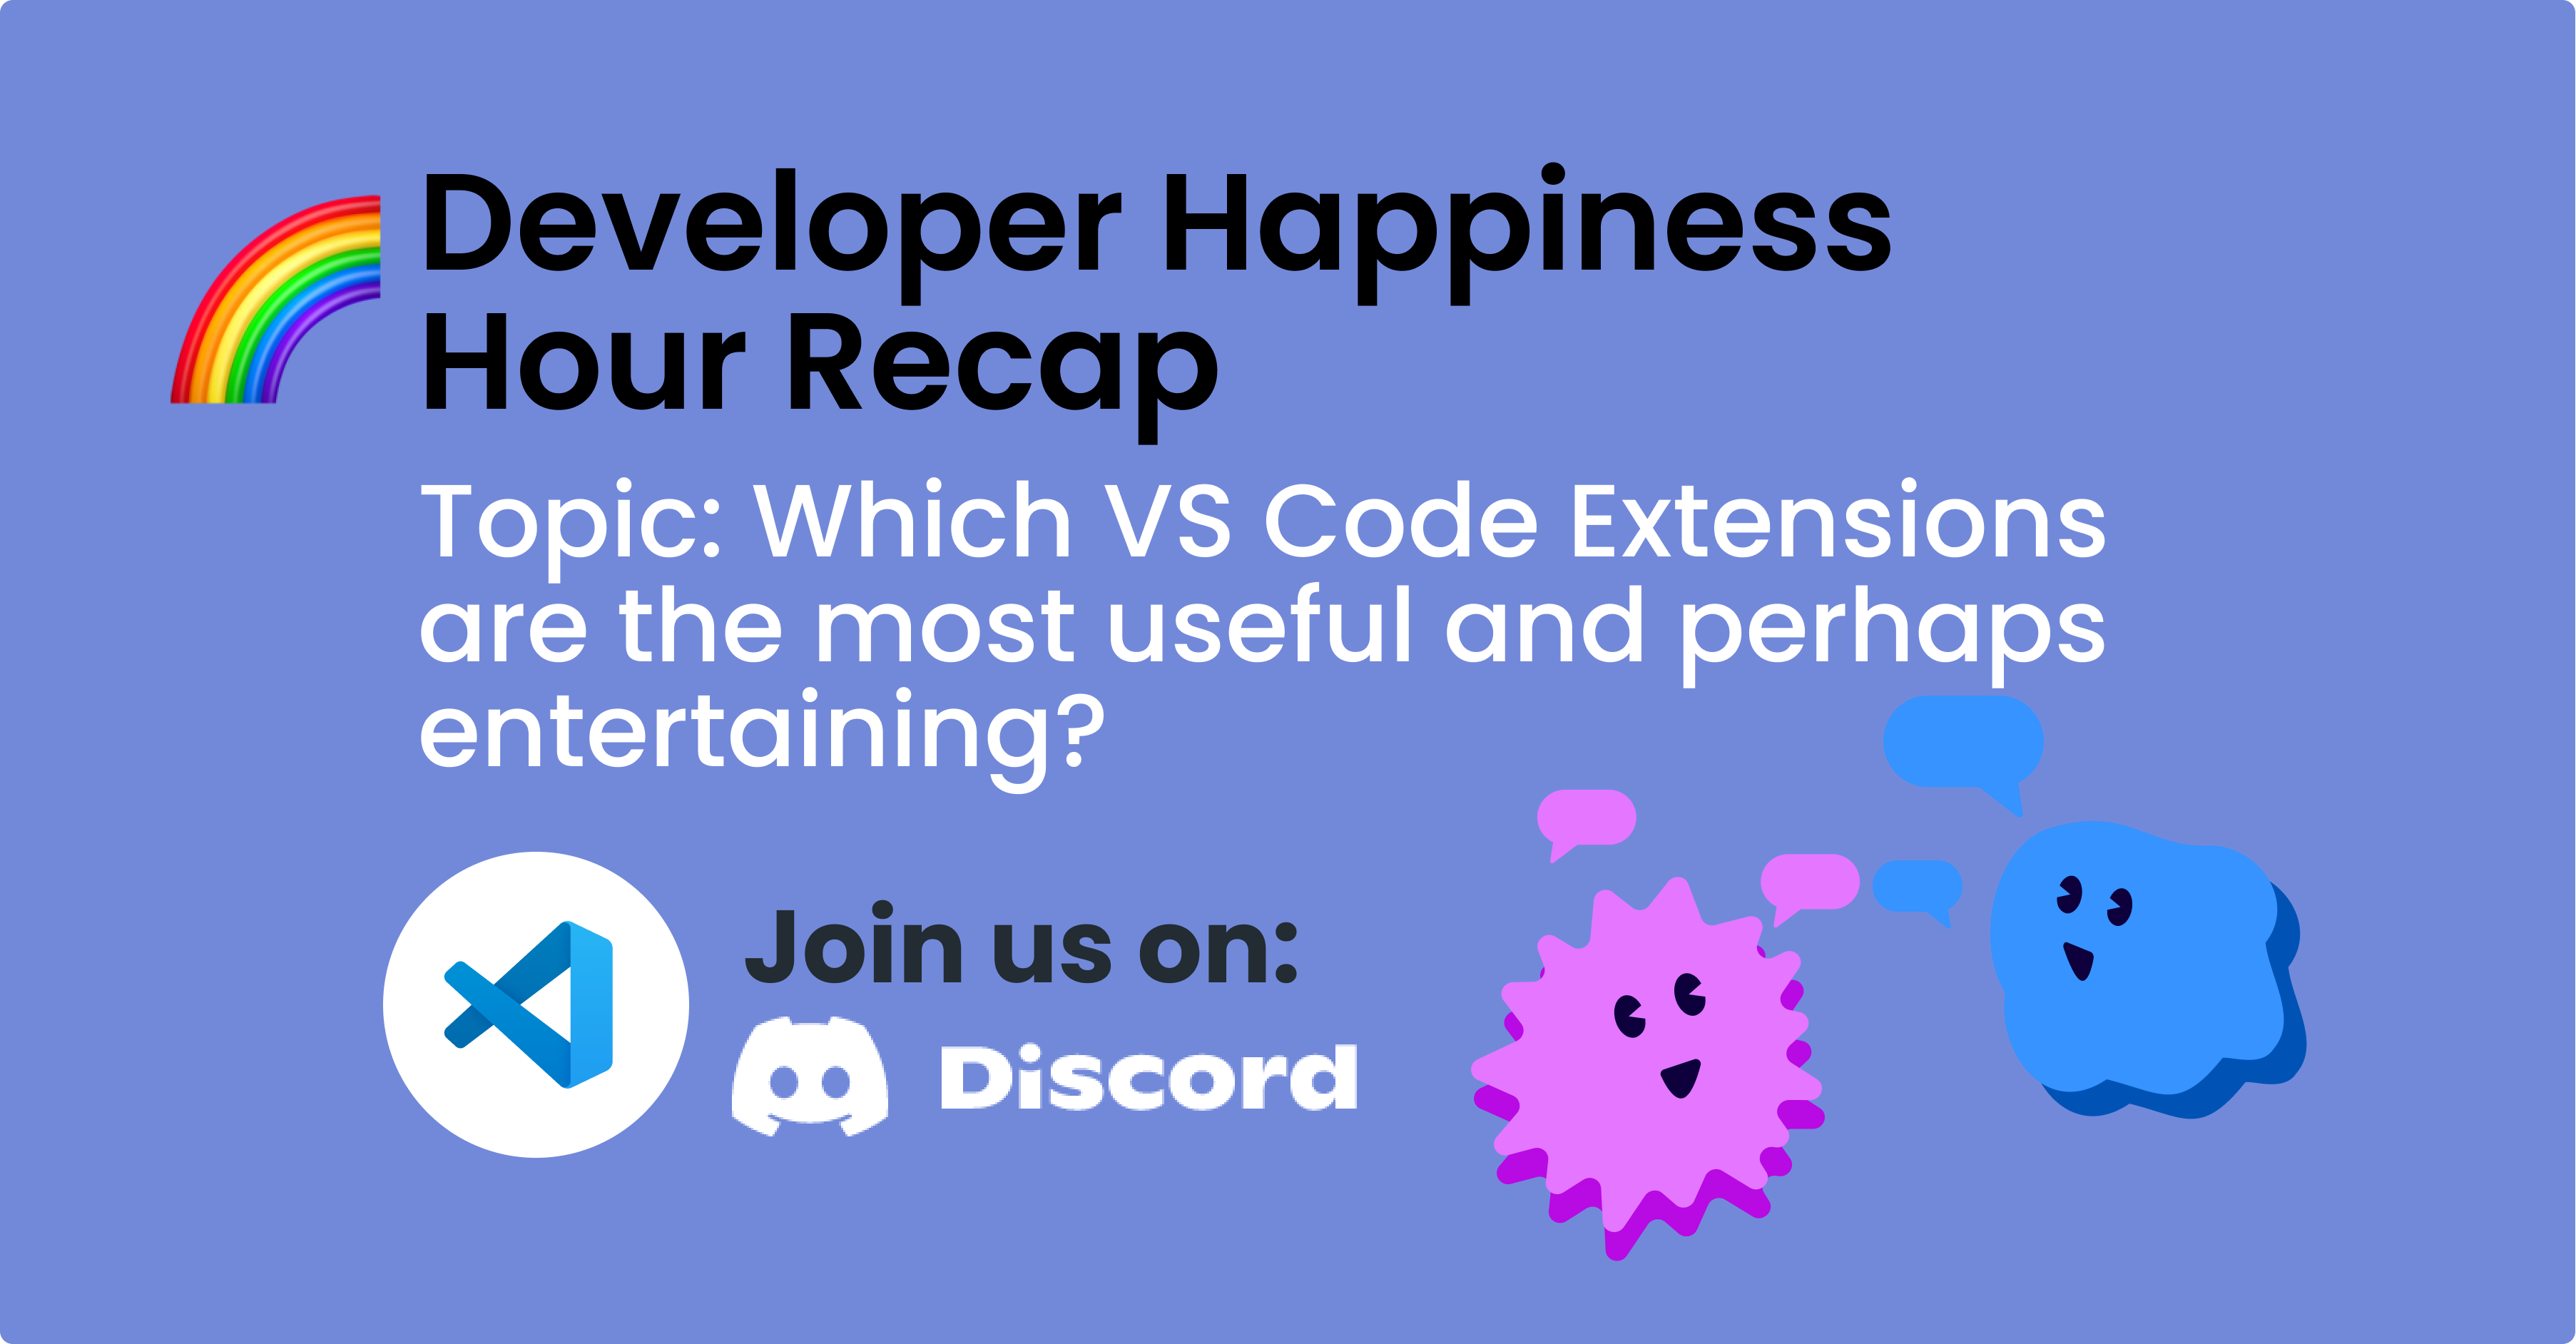 Which VS Code Extensions are the most useful and perhaps entertaining?